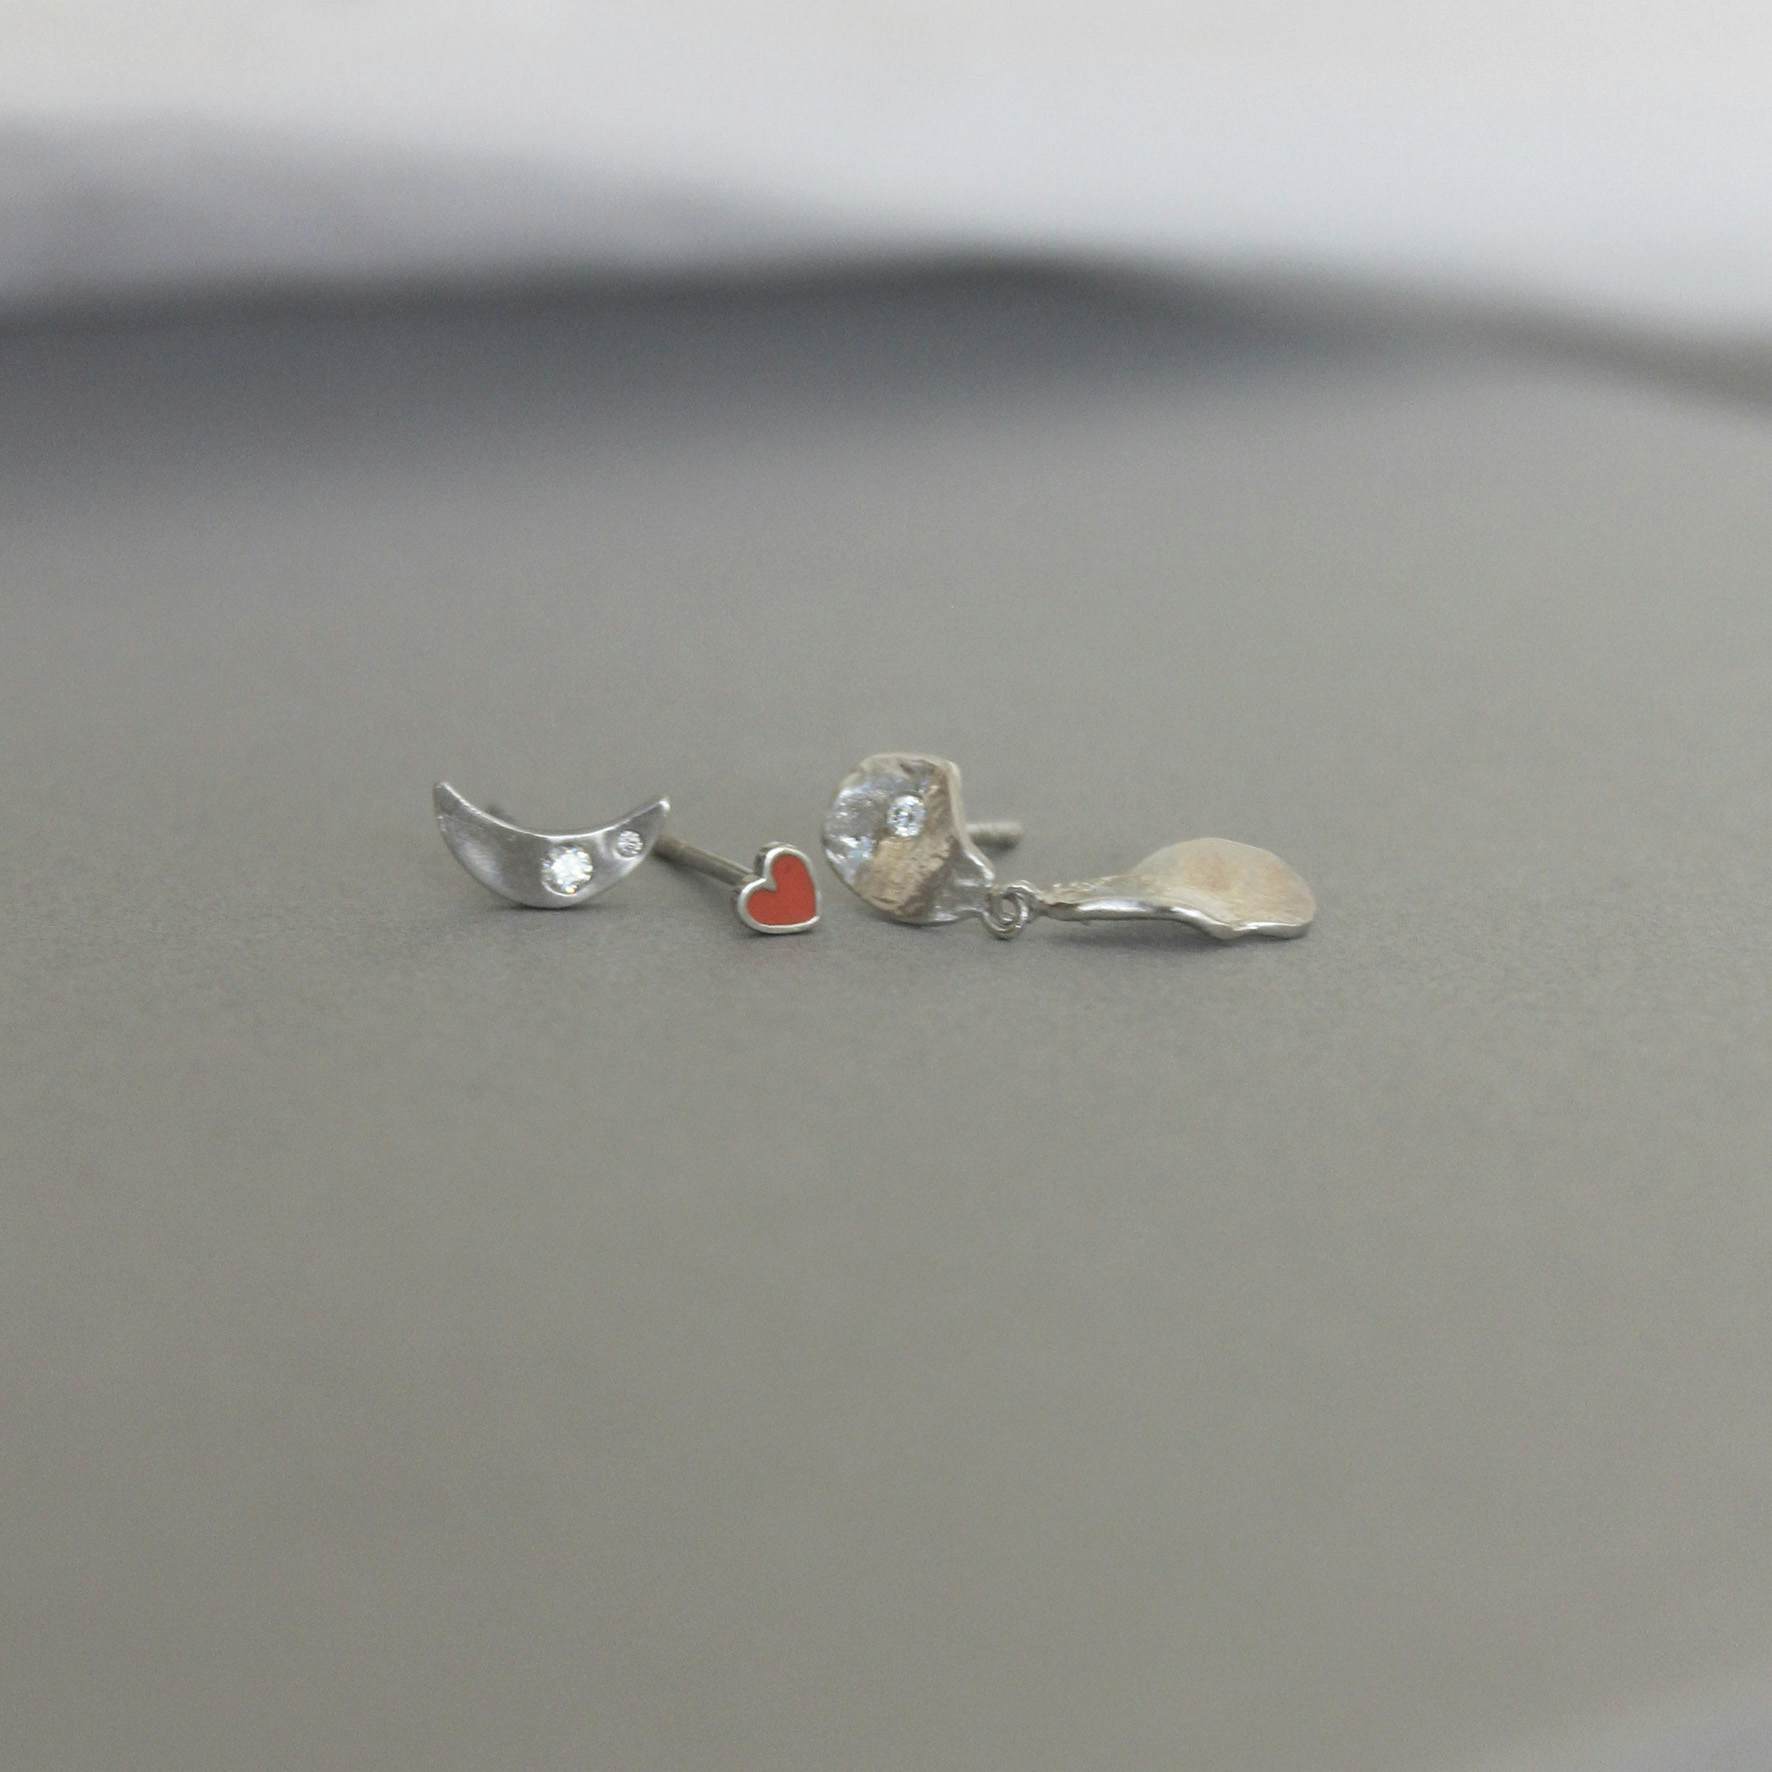 Clear Sea Earring With Stone von STINE A Jewelry in Vergoldet-Silber Sterling 925